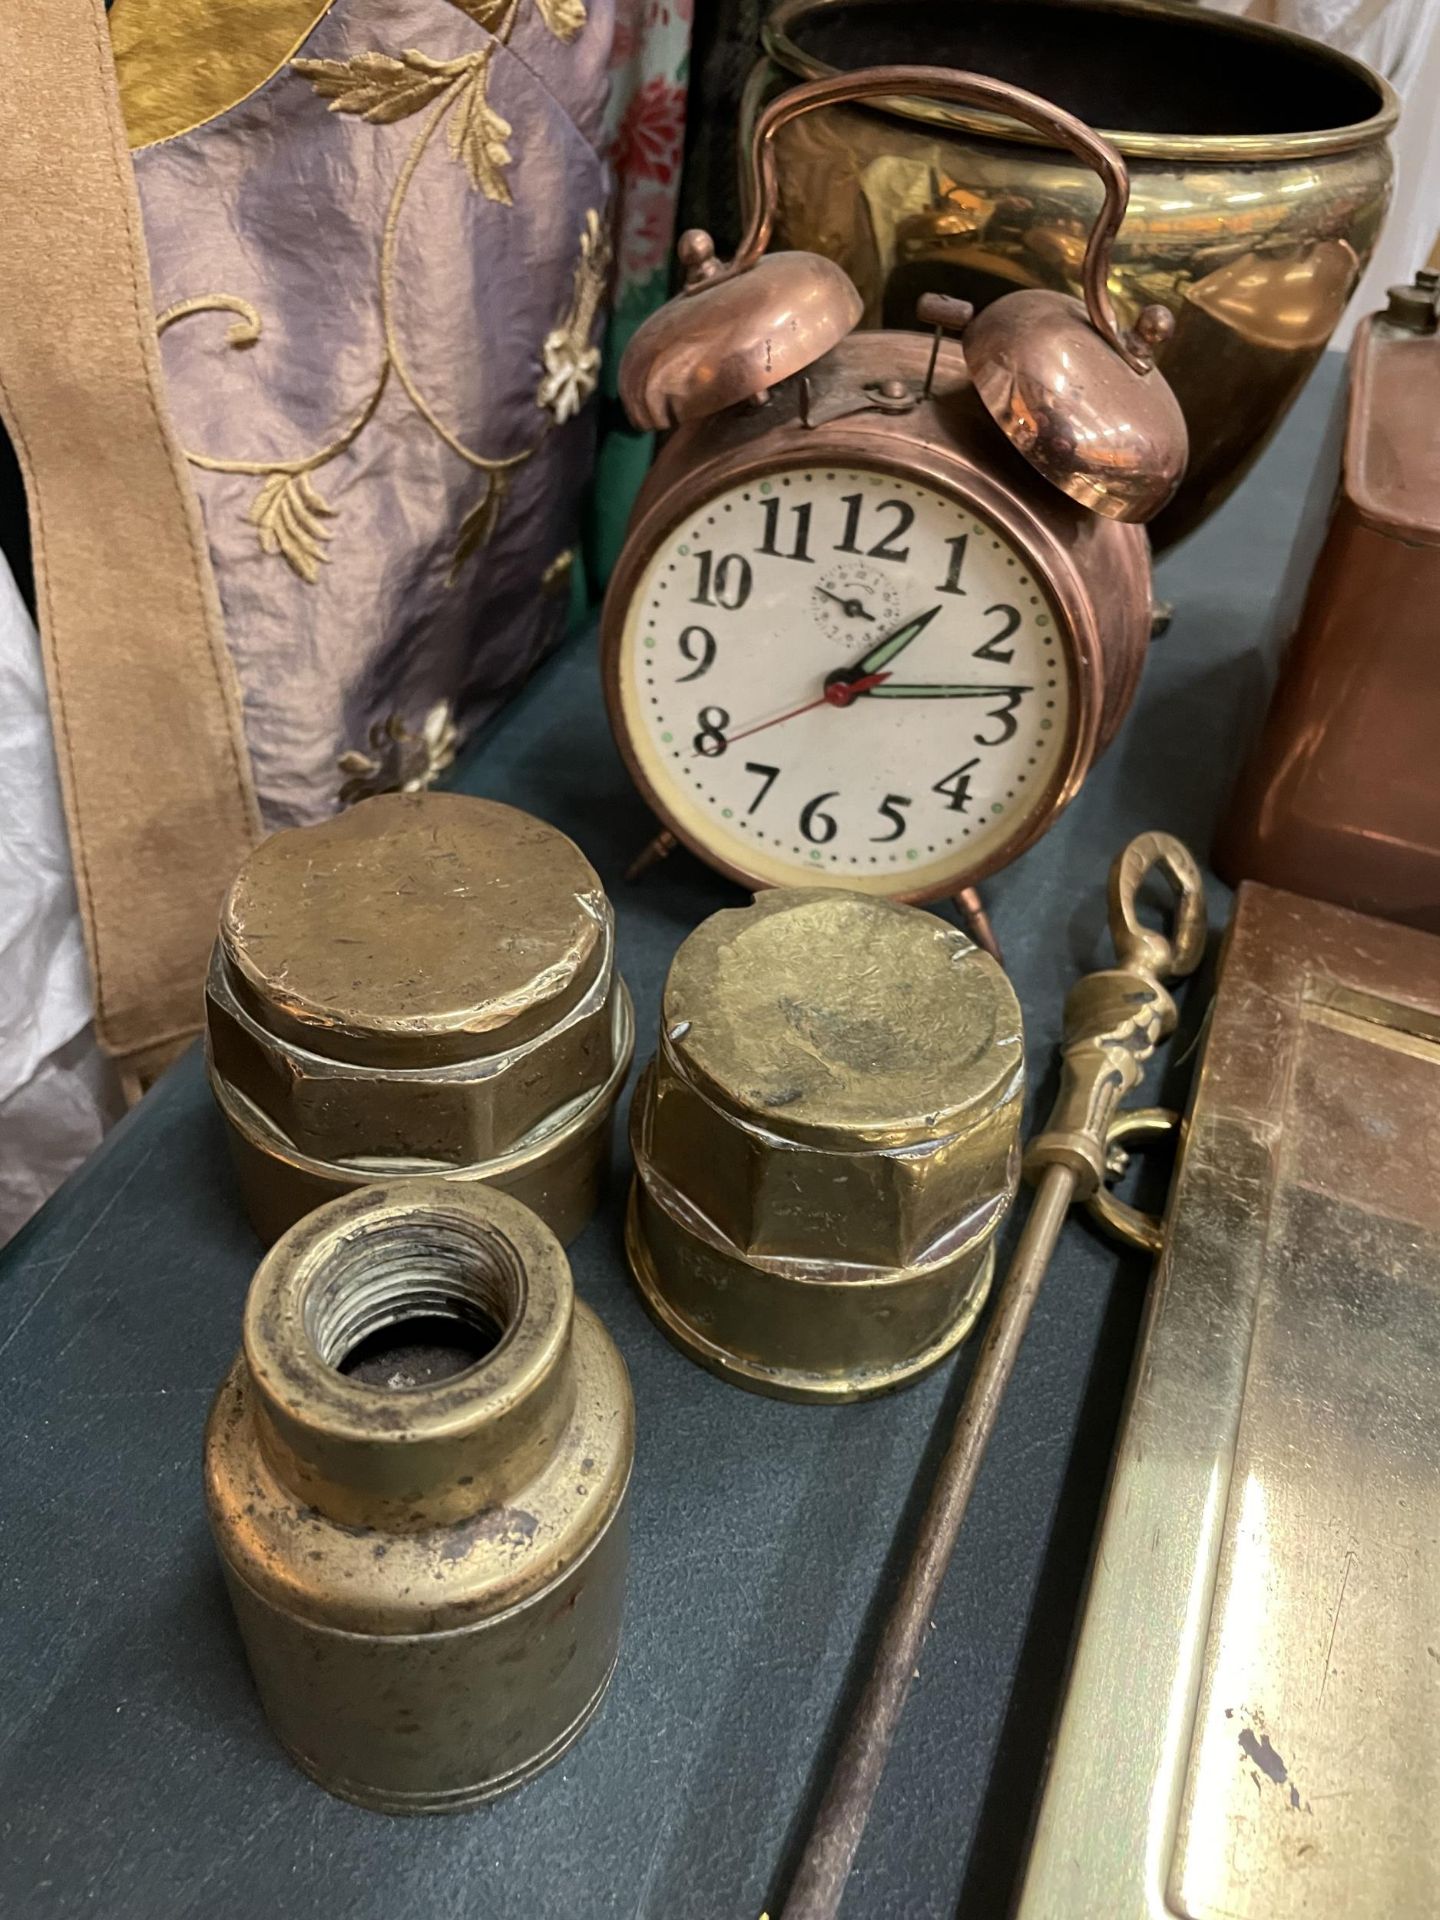 A VARIETY OF ITEMS TO INCLUDE A VINTAGE PARAFFIN HEATER, ALARM CLOCK, CANDLE SNUFFER, LETTER BOX - Image 2 of 5